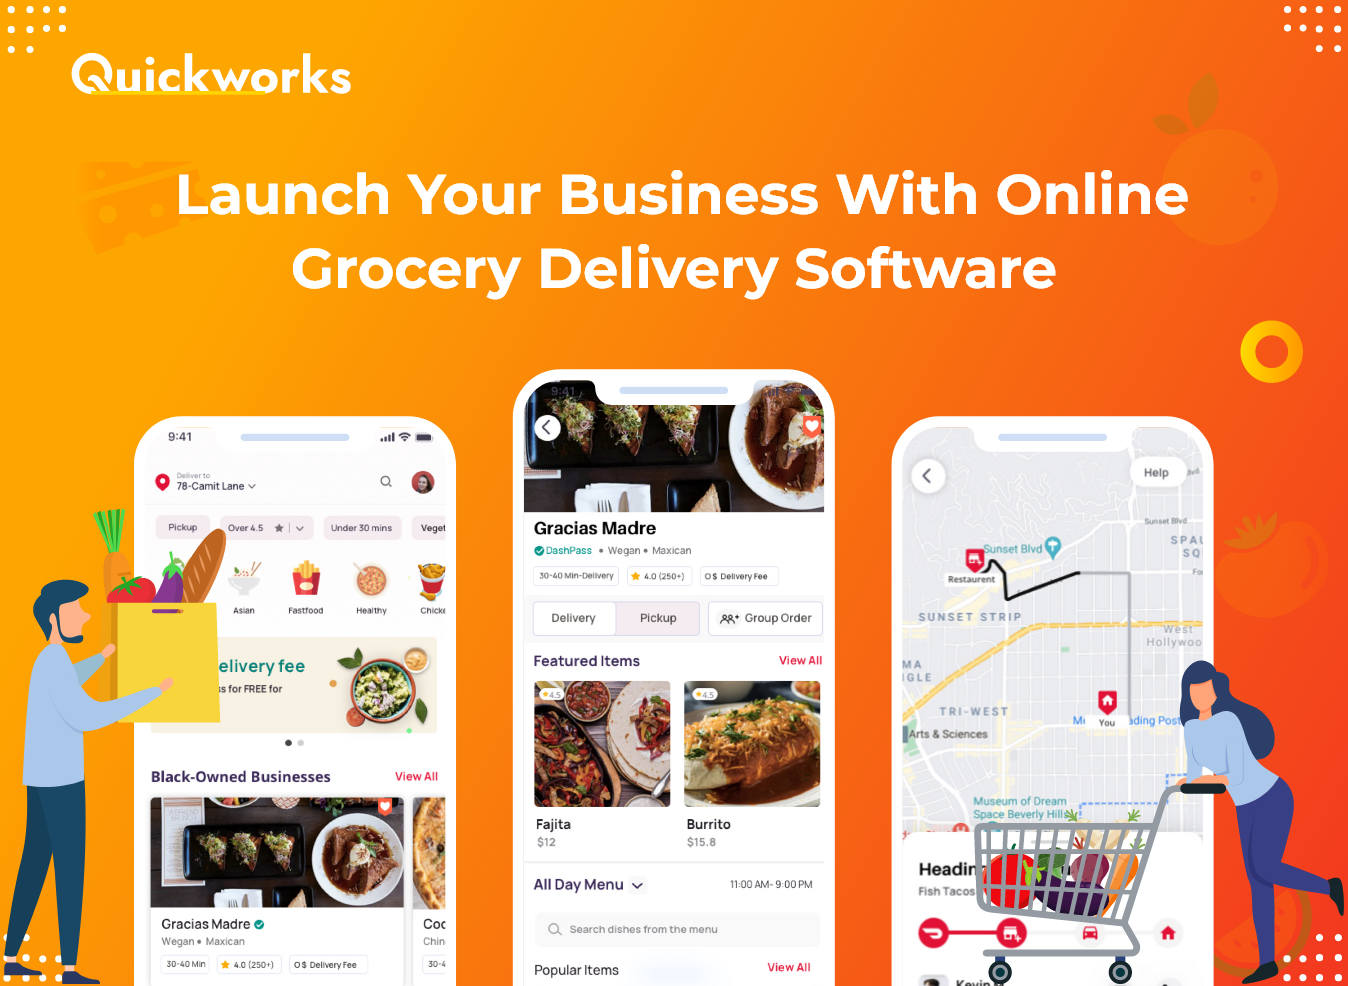 How To Start Your Grocery Delivery Business The Easiest Way!